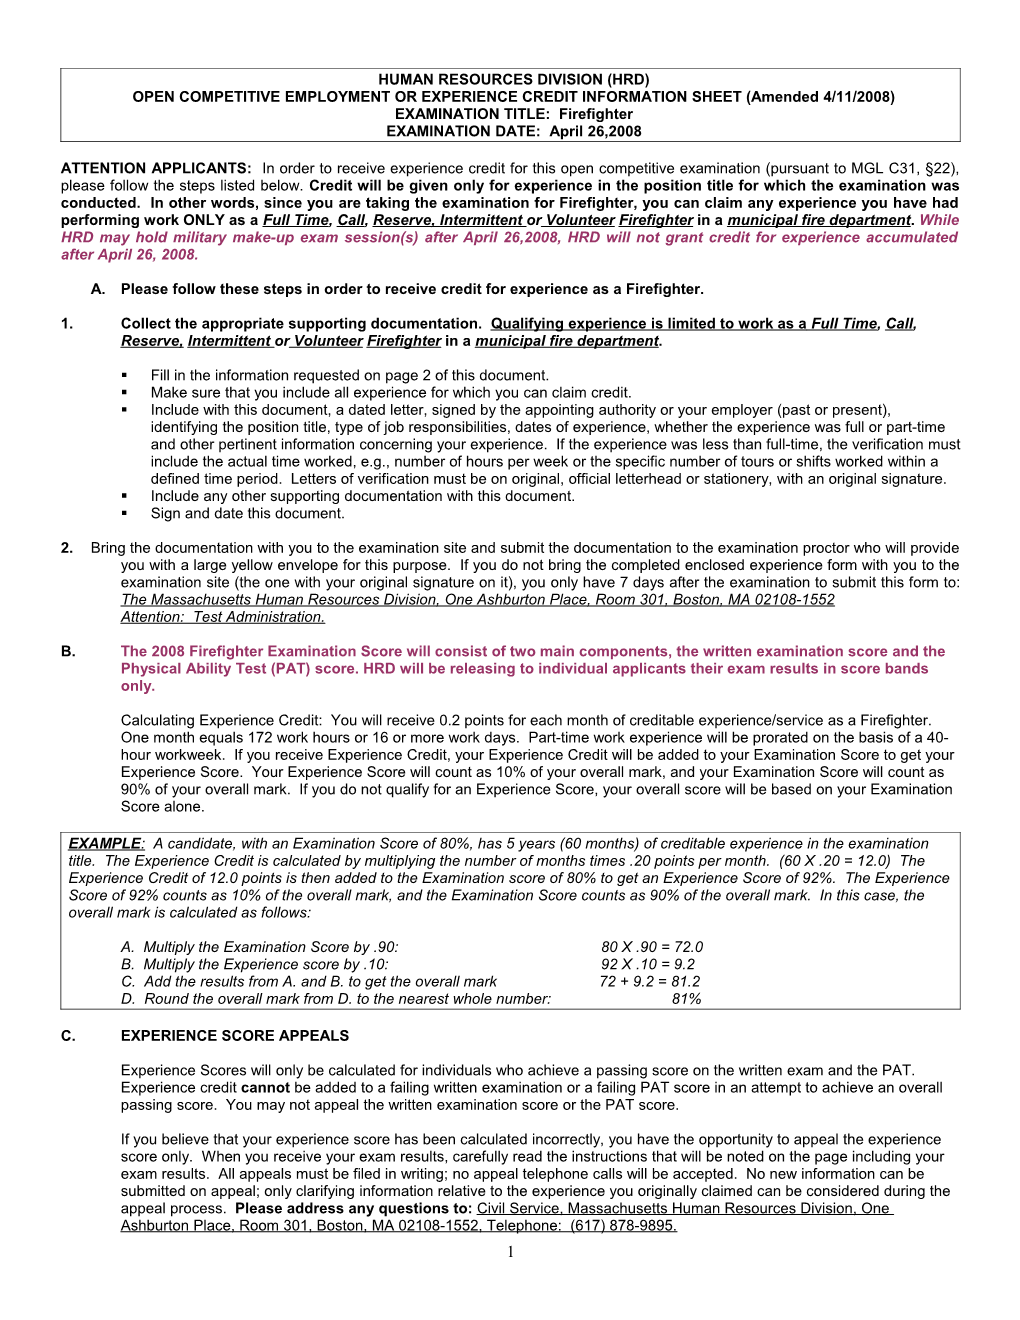 2008 Firefighter Exam Open Competitive Employment Or Experience Credit Information Sheet